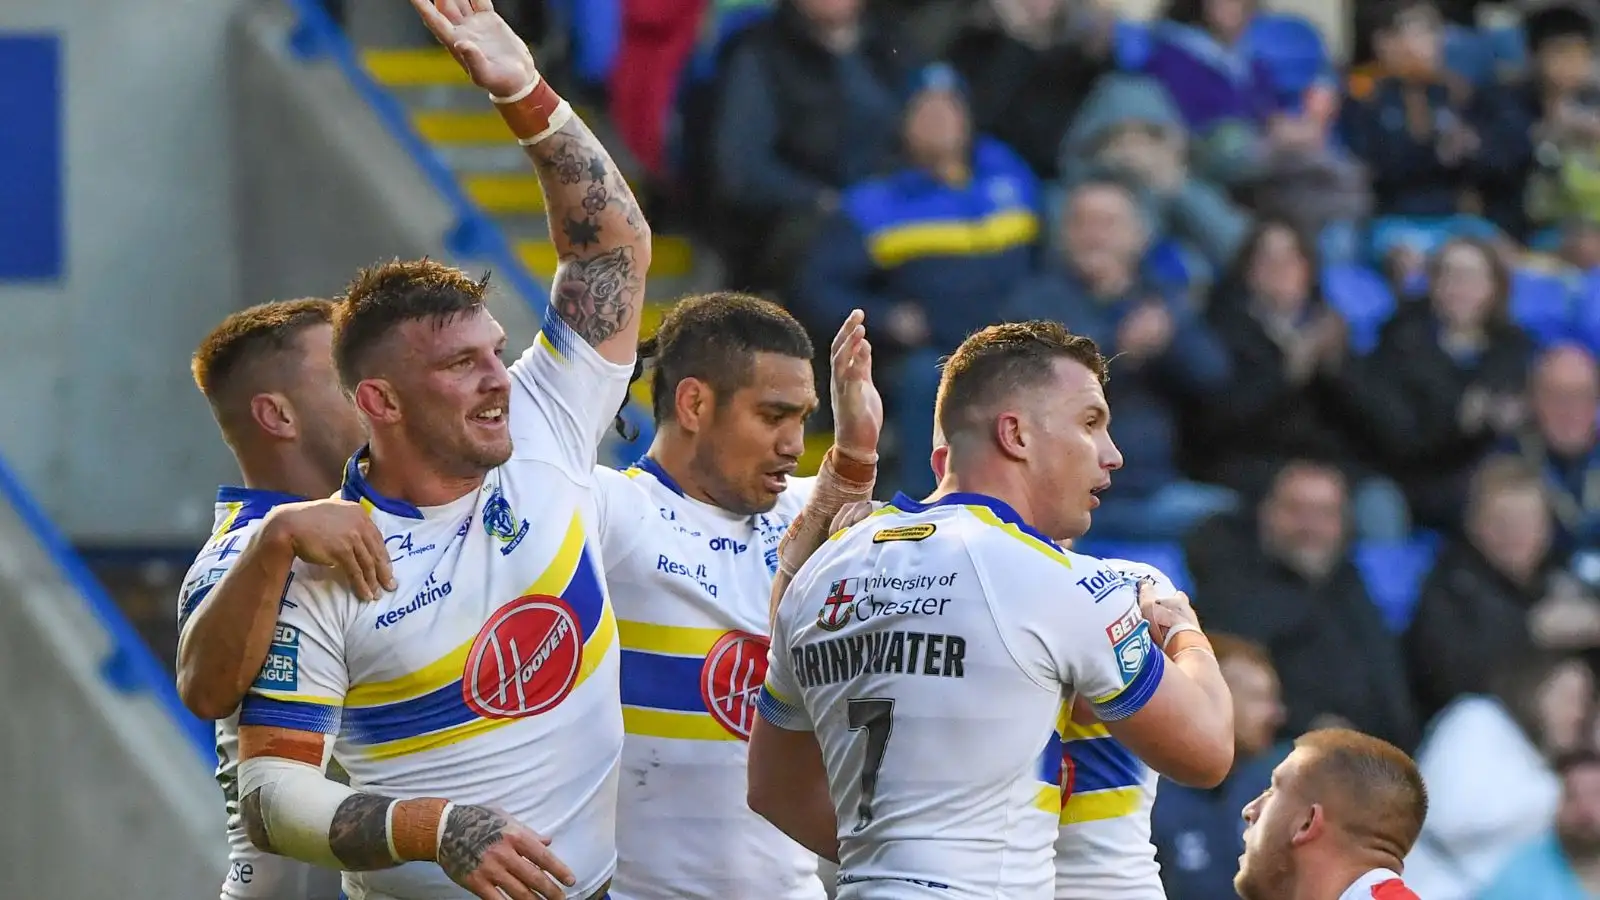 Leeds Rhinos target offered monster deal to stay in NRL; Warrington star’s future subject of growing speculation